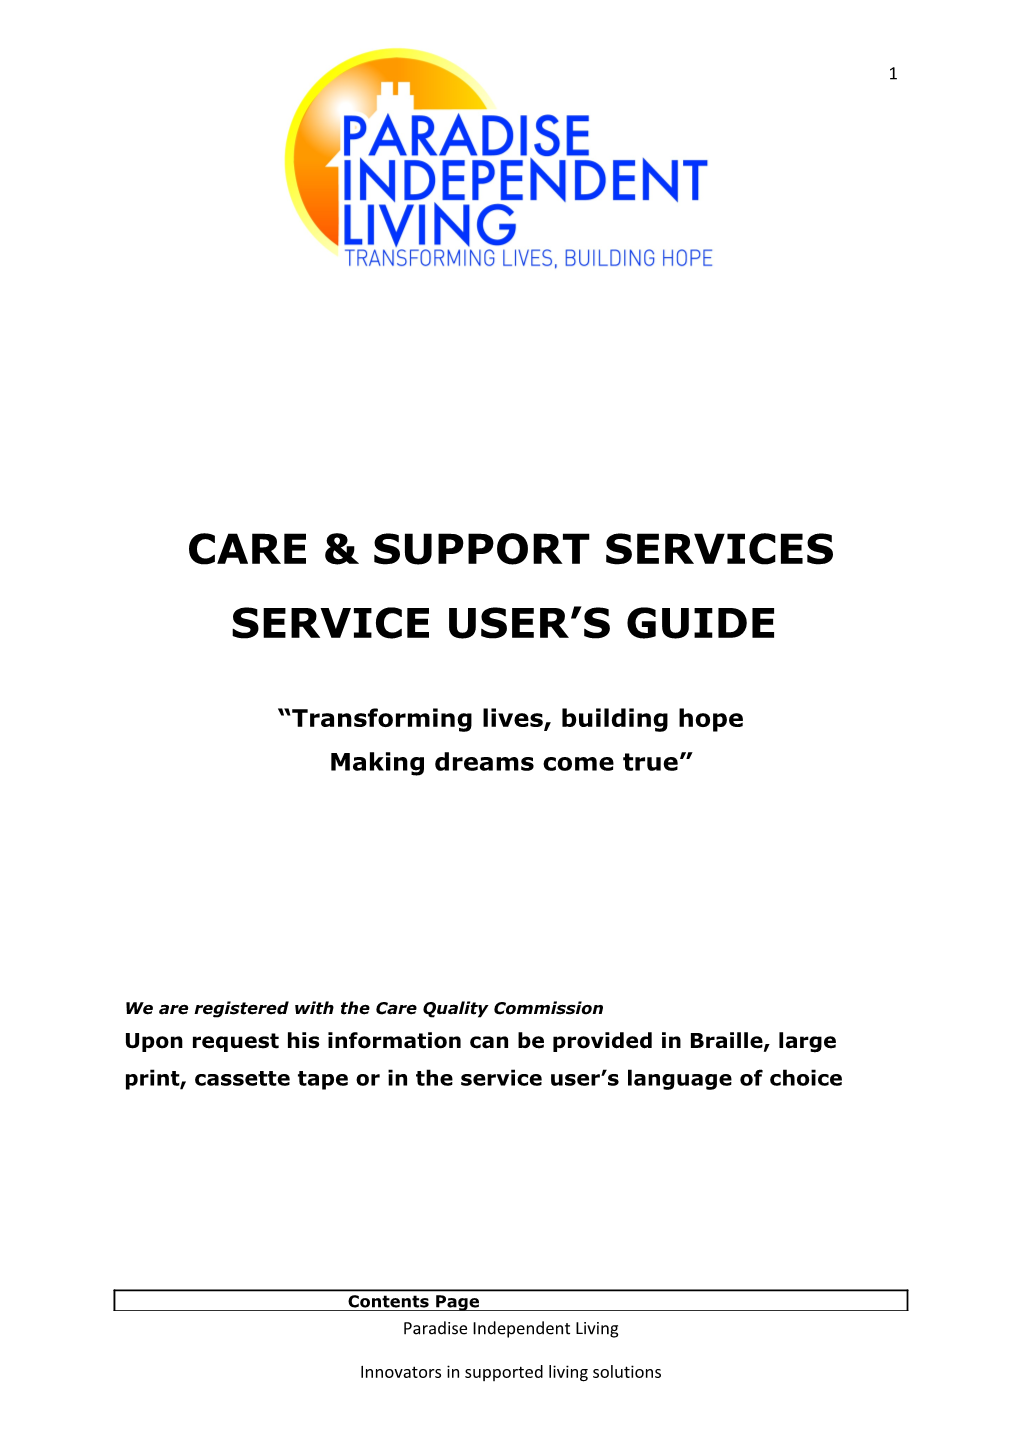 Care & Support Services